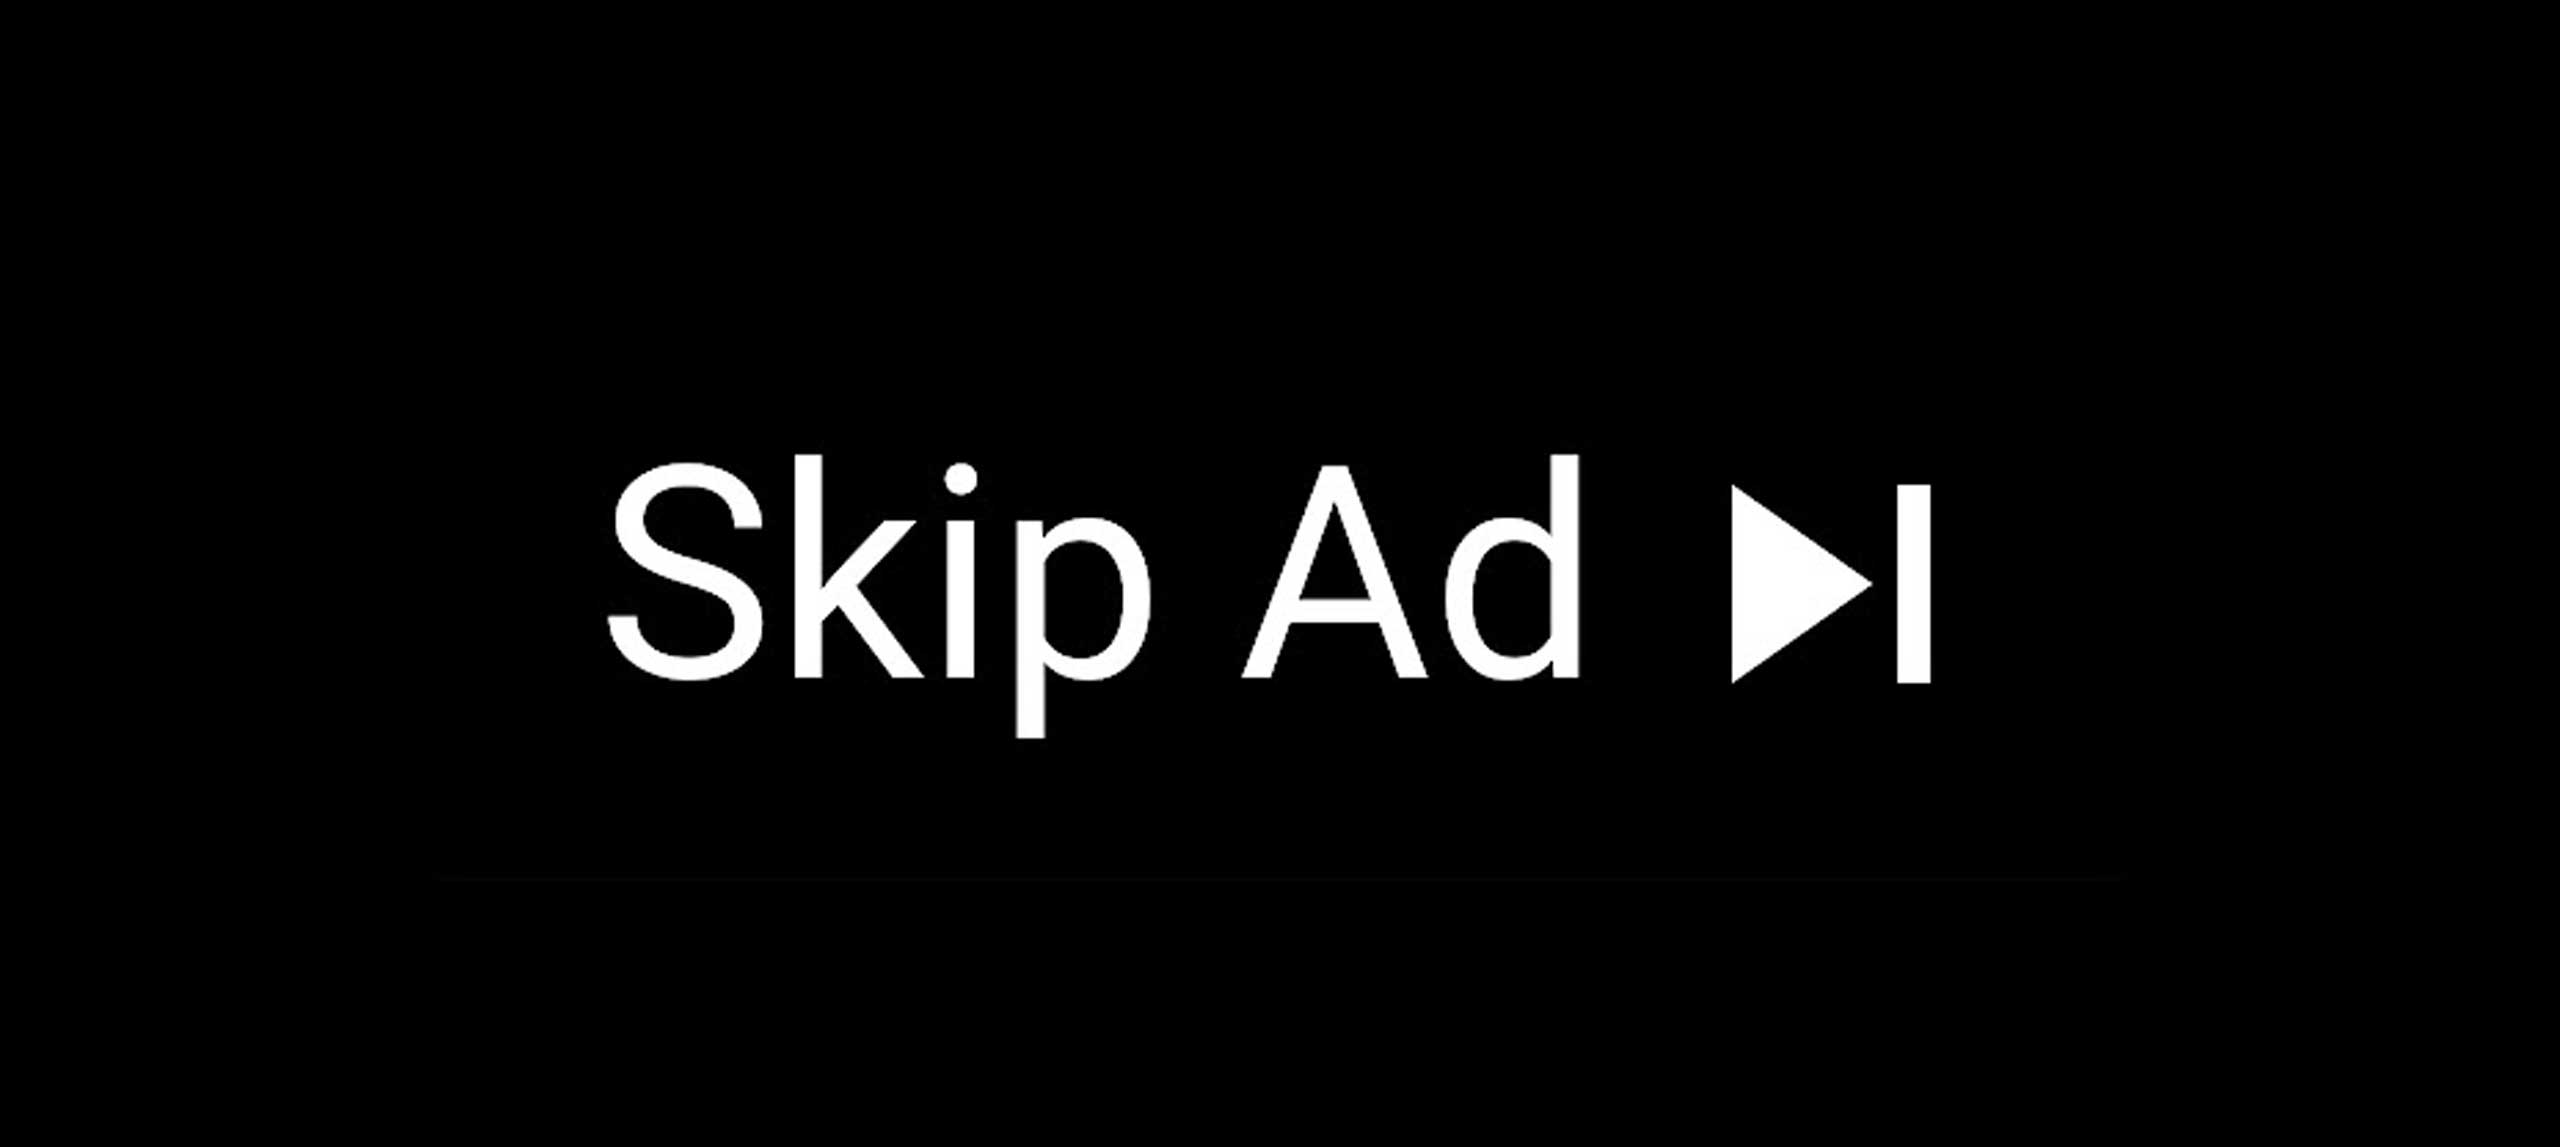 The Ad That Skips Itself